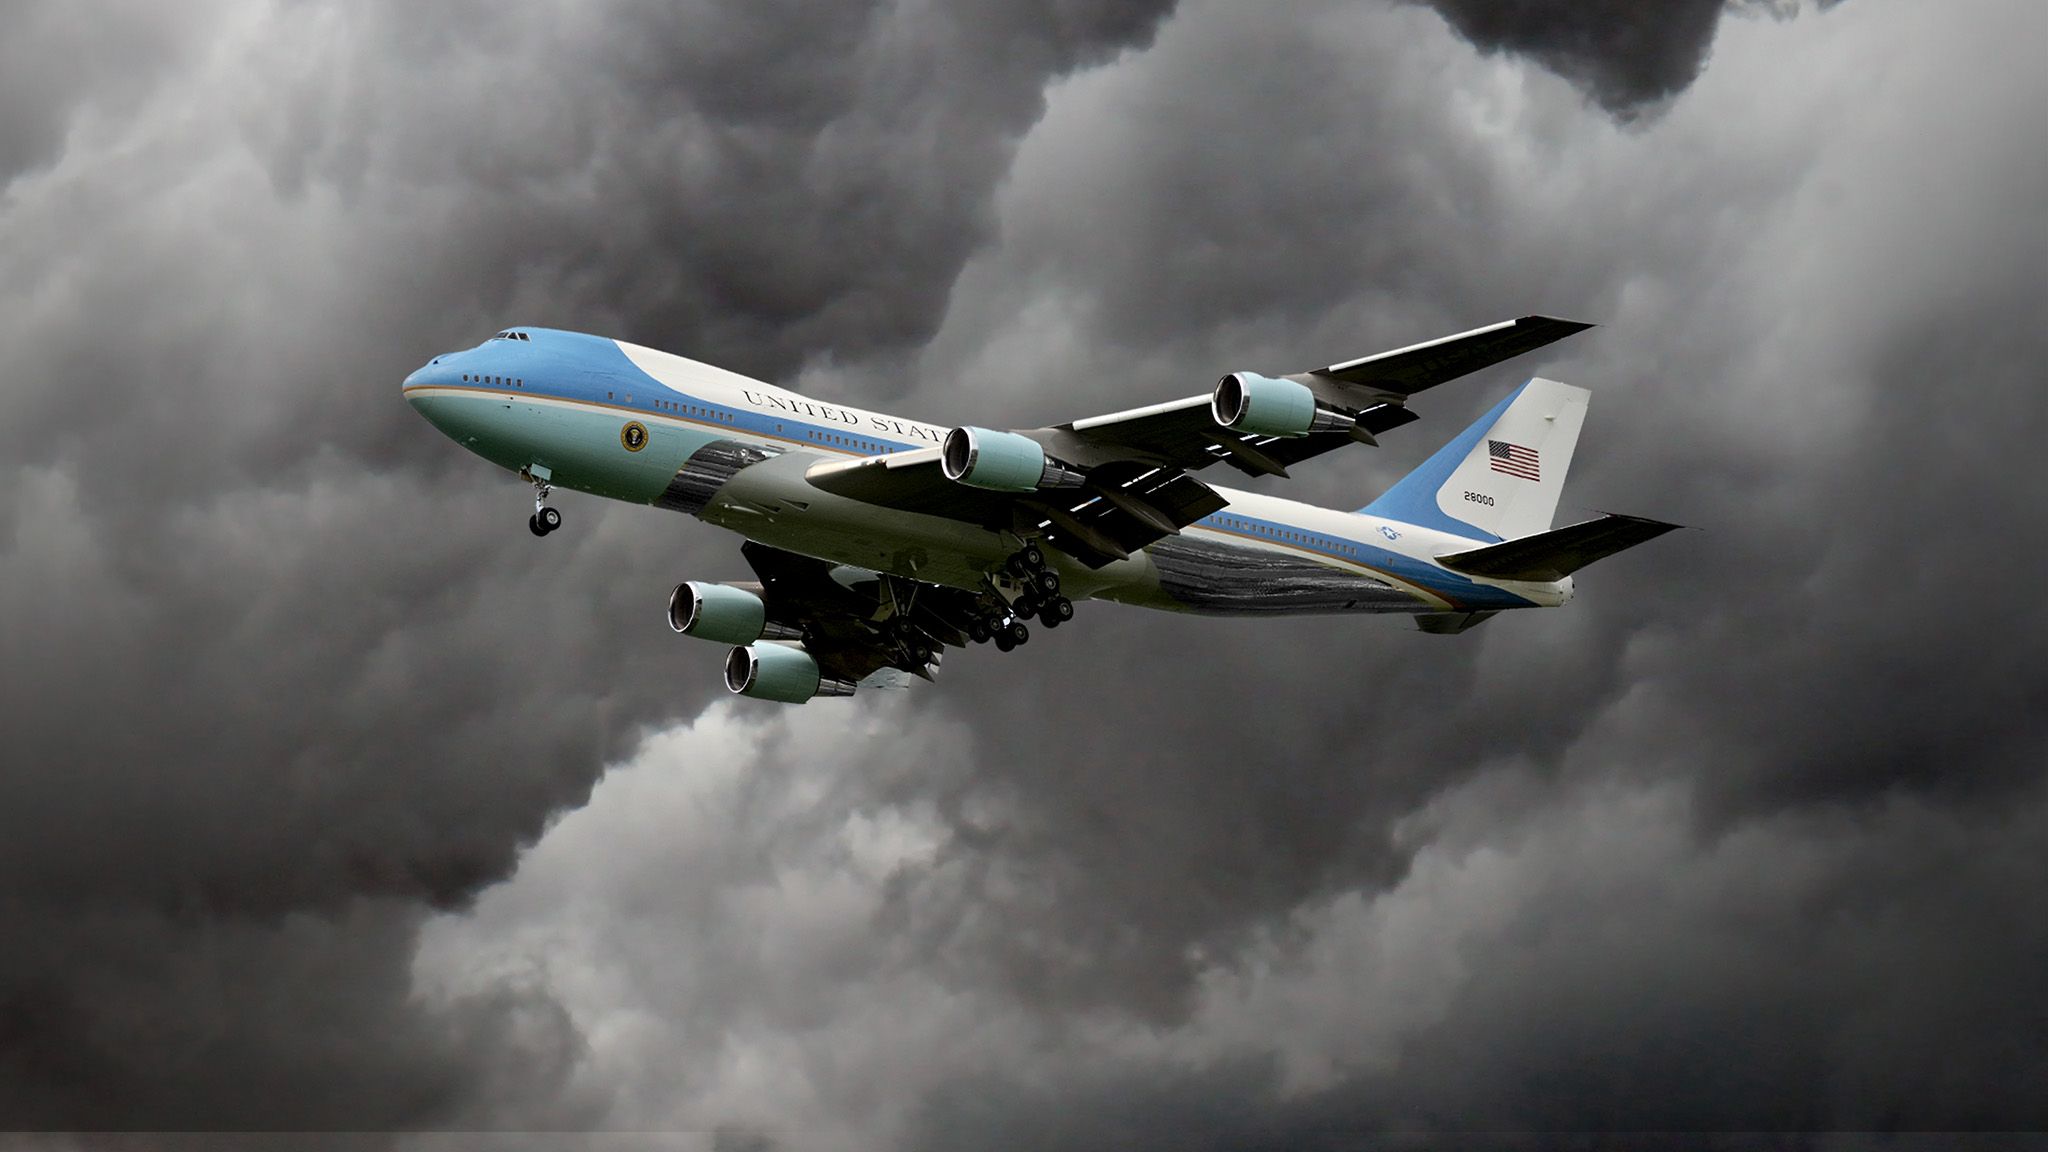 Старт эйр. Boeing Air Force. Air Force one Кеннеди. Ground Force one. Boeing VC-25.